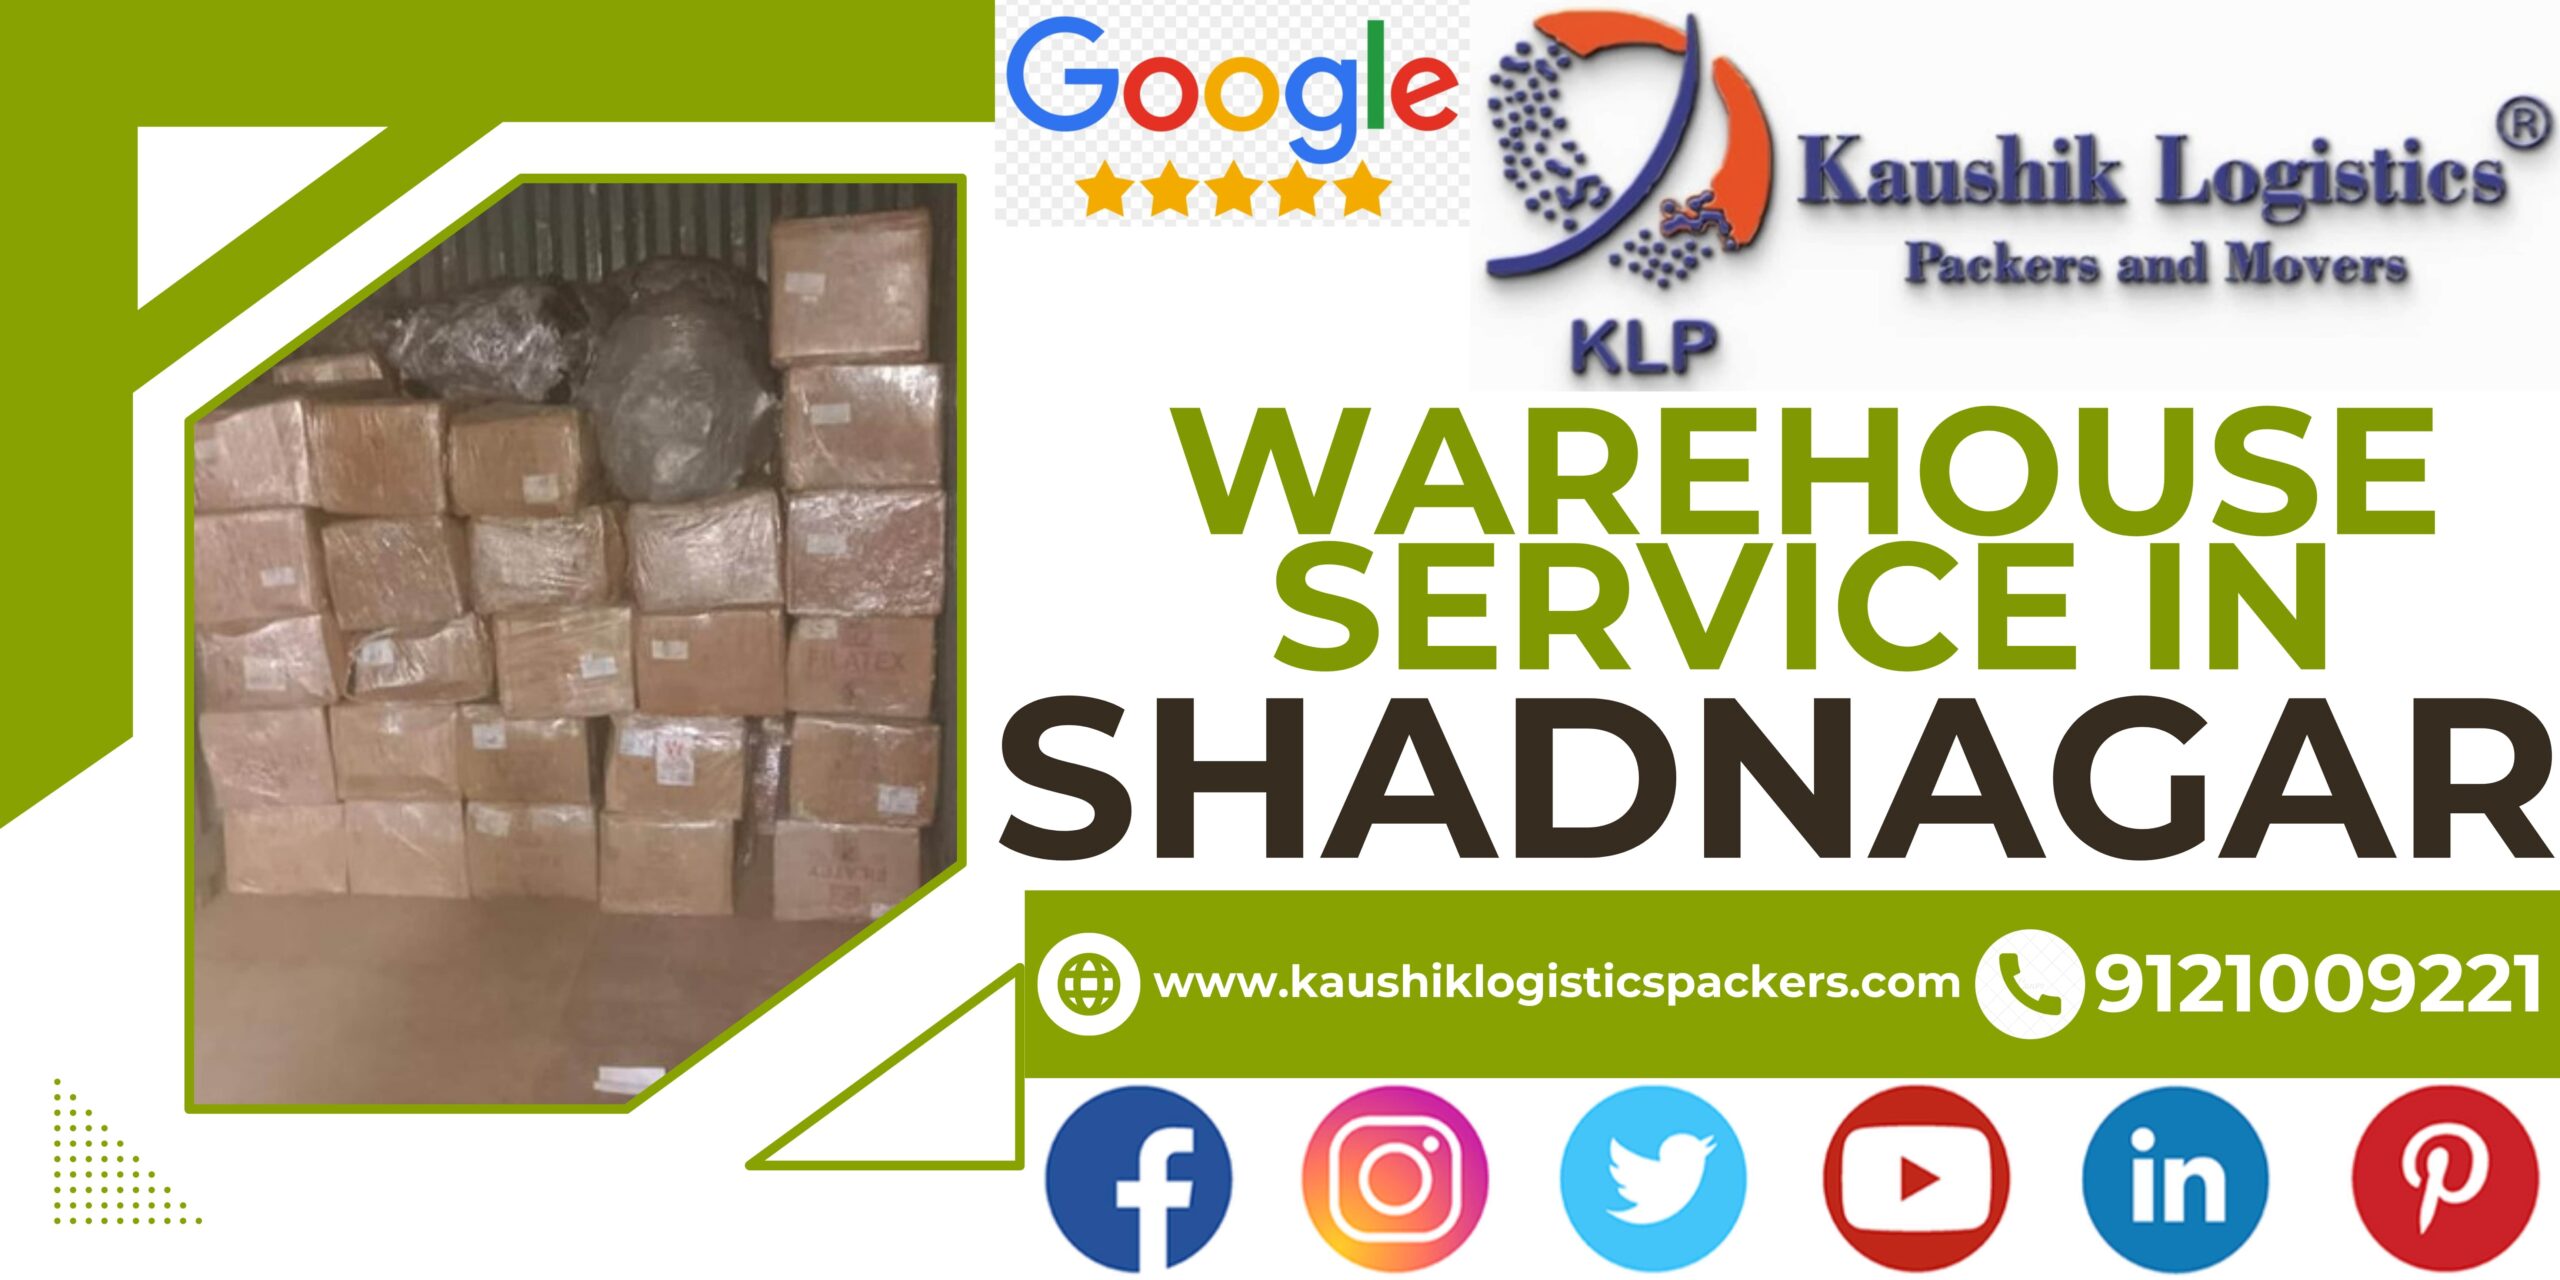 Packers and Movers In Shadnagar